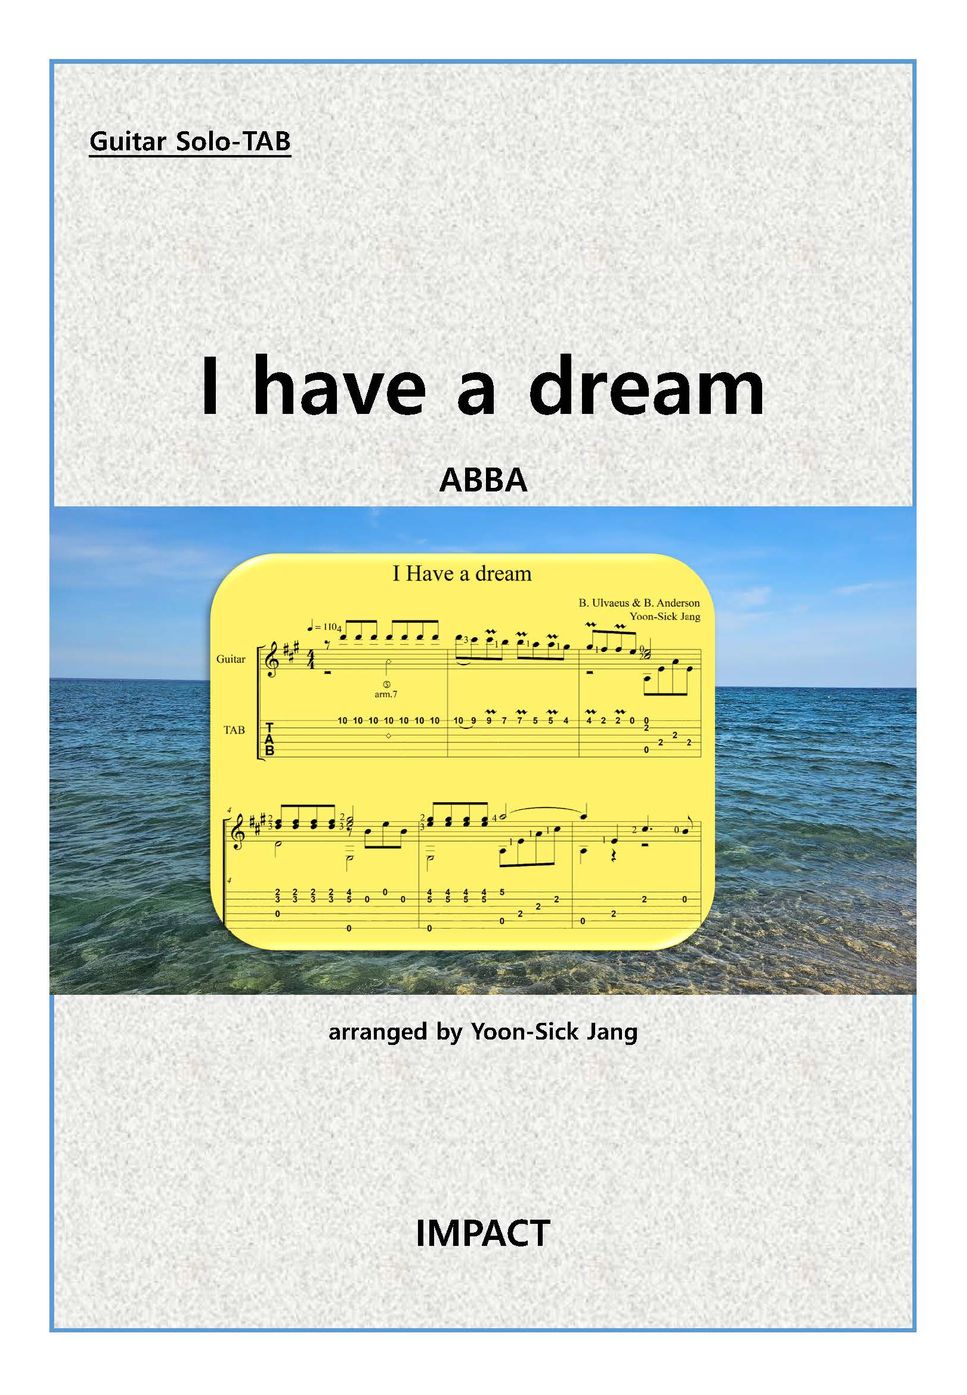 B. Ulvaeus, B. Anderson - I have a dream (a piece for guitar solo at intermediate level) by Yoon-Sick Jang